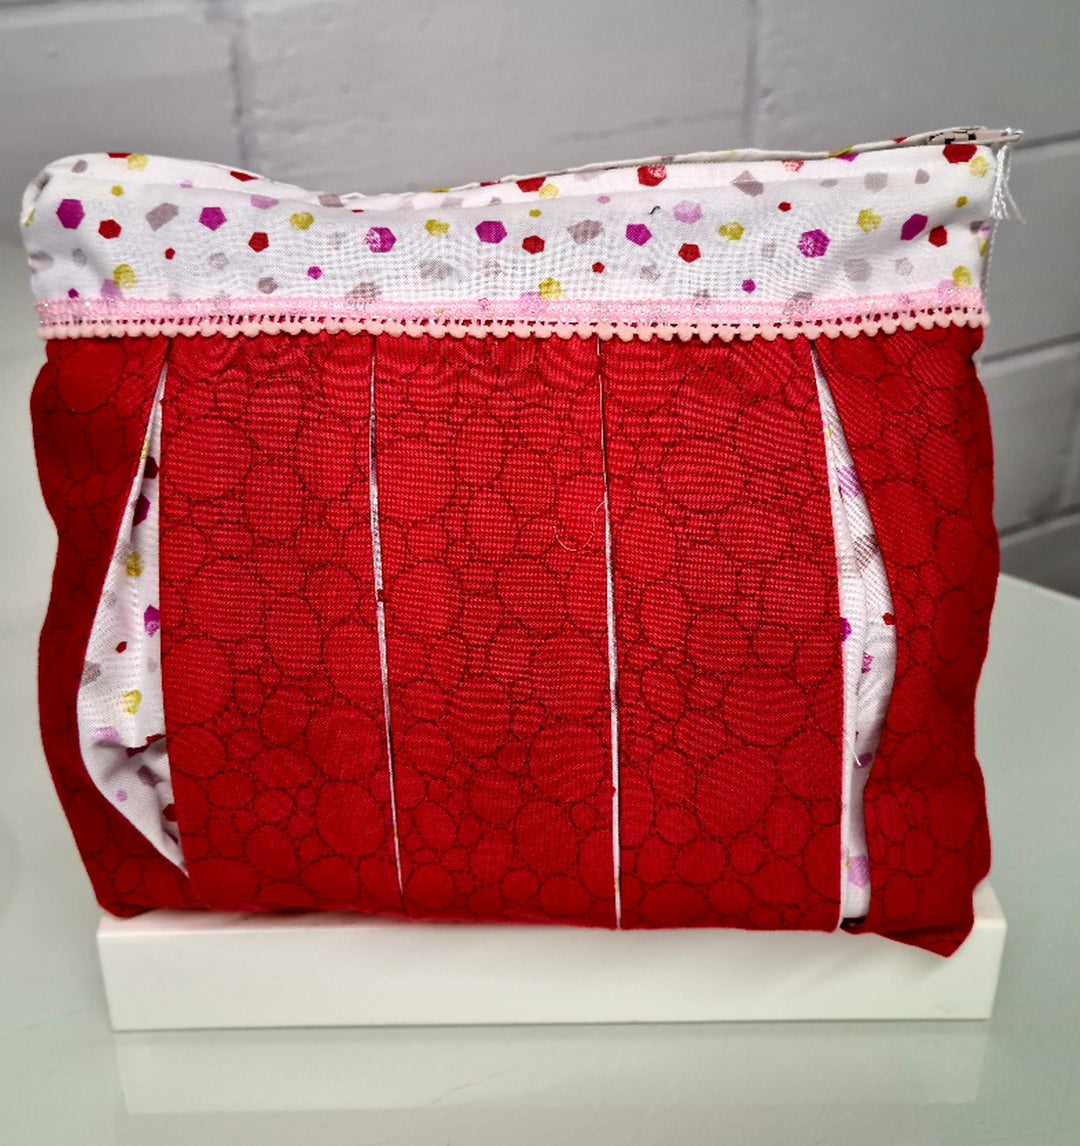 Red with White Polkadot: Pleated Cosmetic Bag